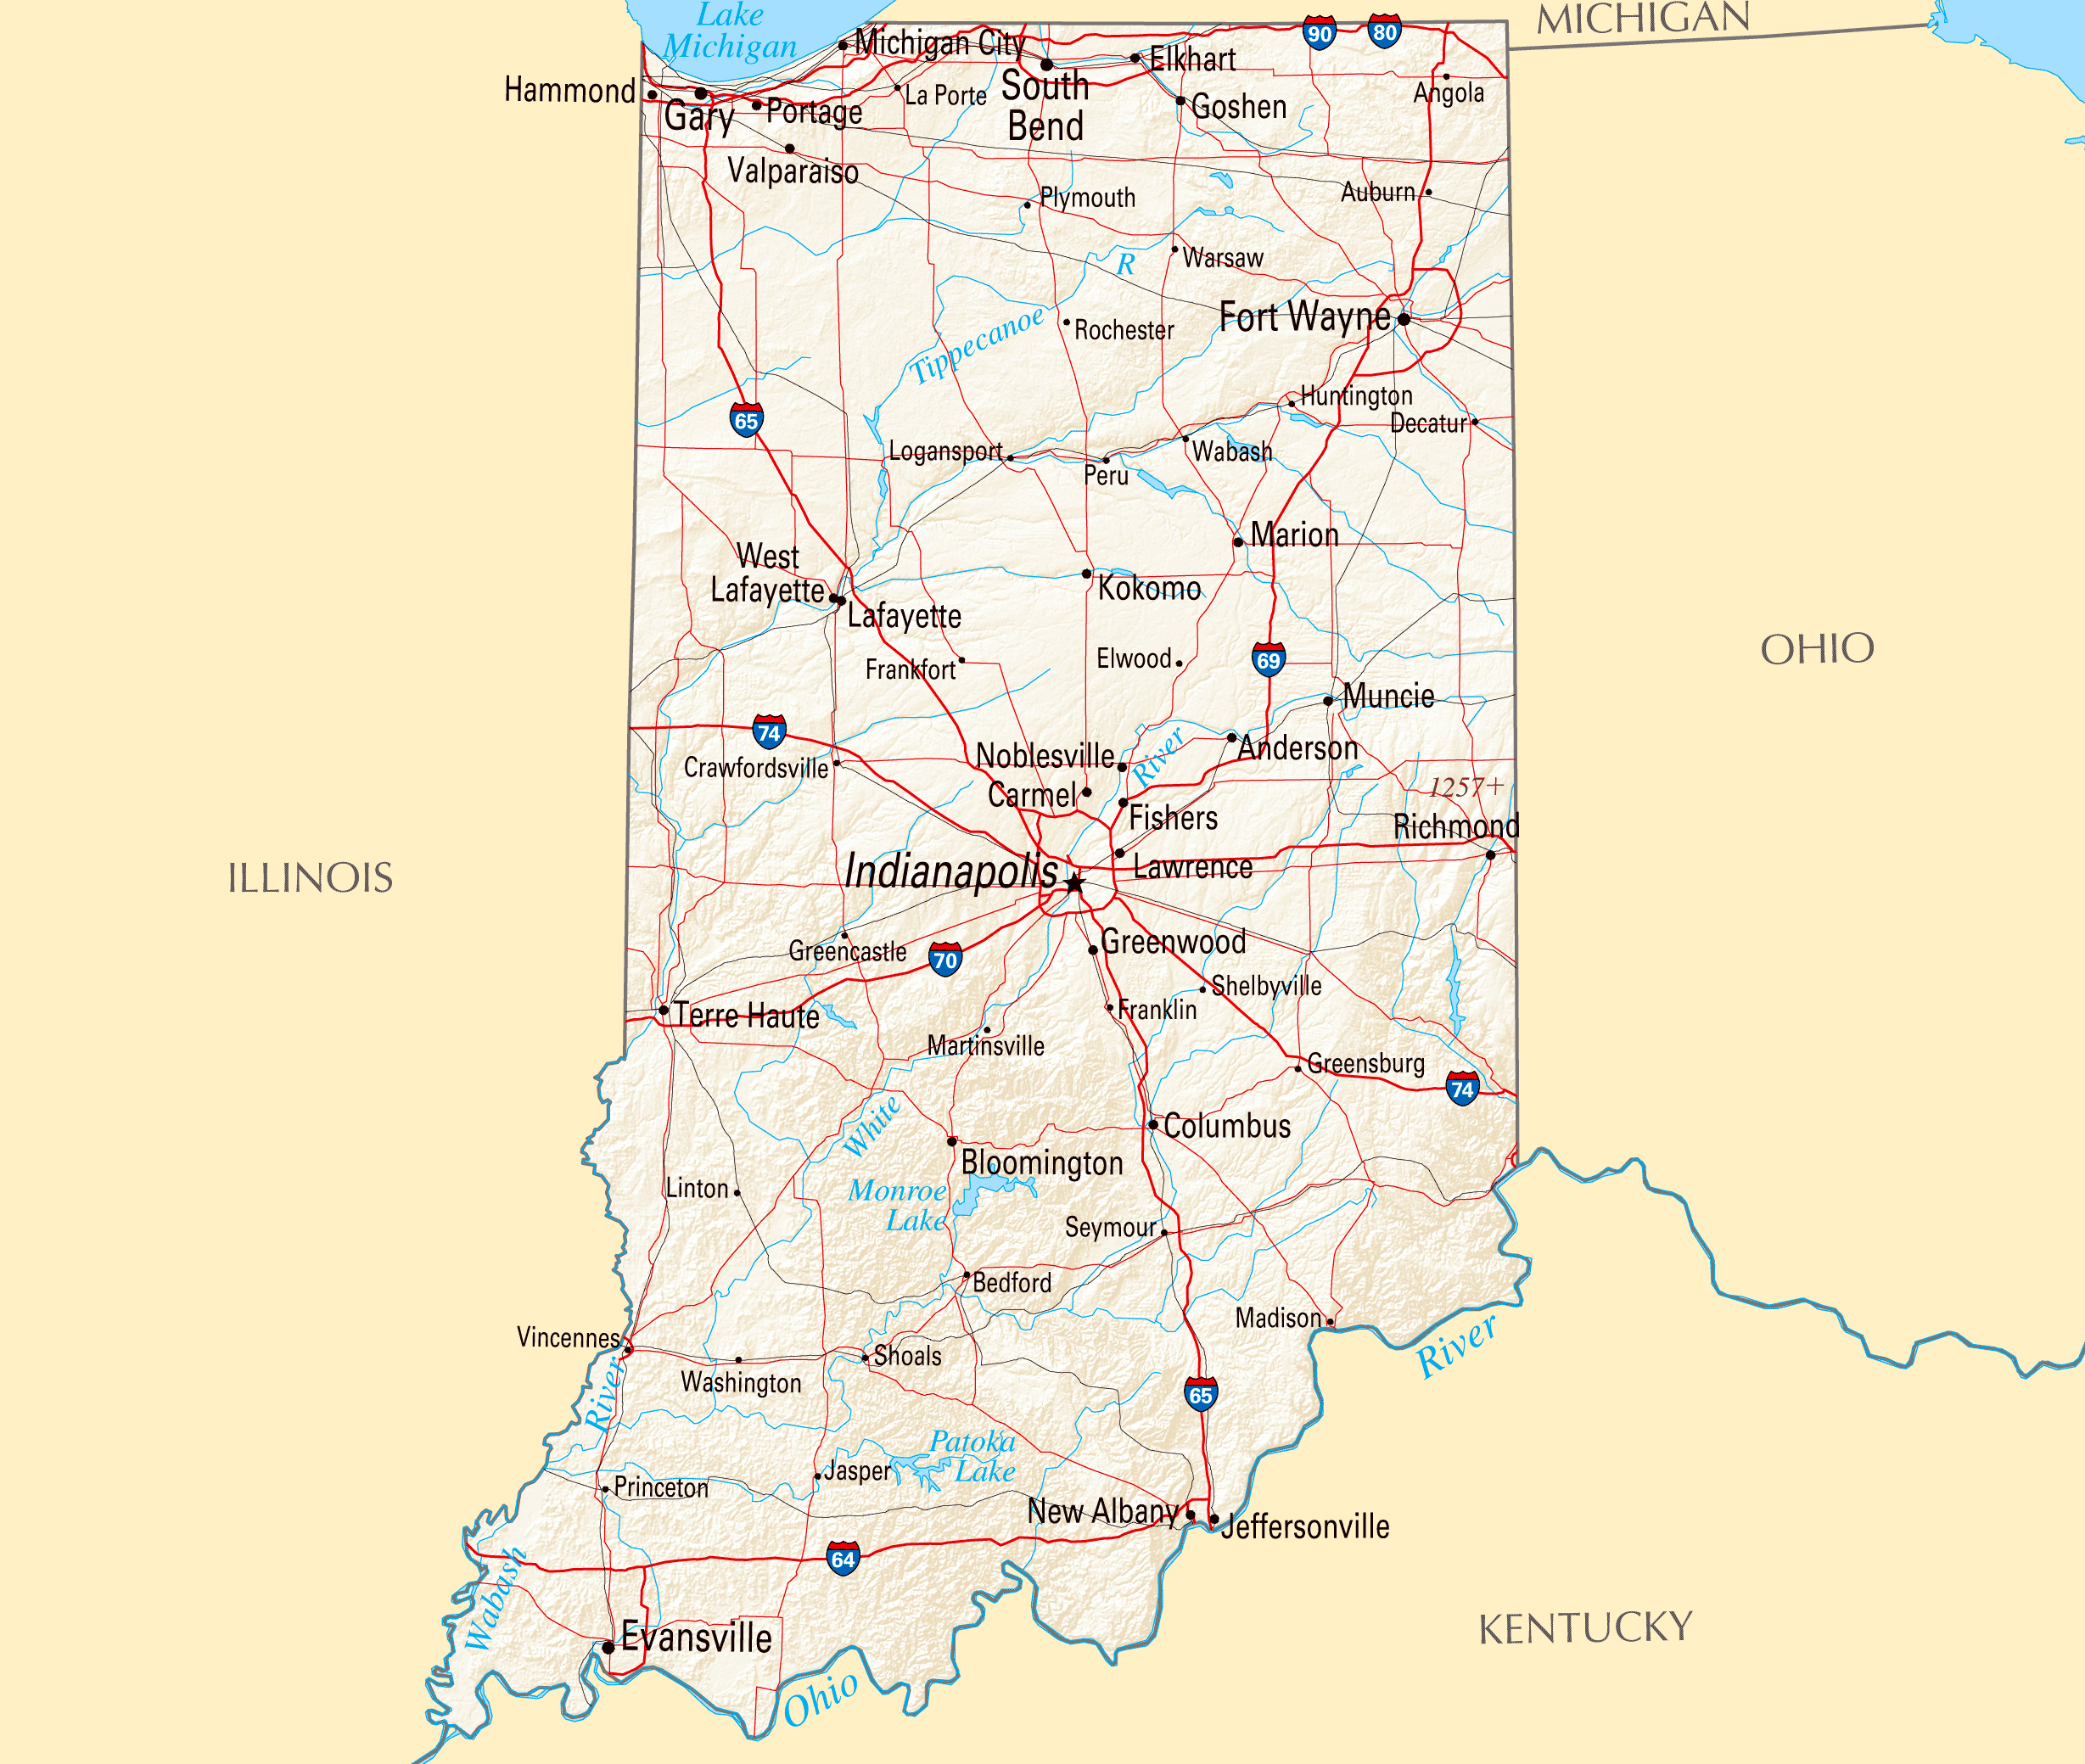 Indiana On State Map Large Detailed Map Of Indiana State With Roads, Highways, Relief And Major  Cities | Indiana State | Usa | Maps Of The Usa | Maps Collection Of The  United States Of America